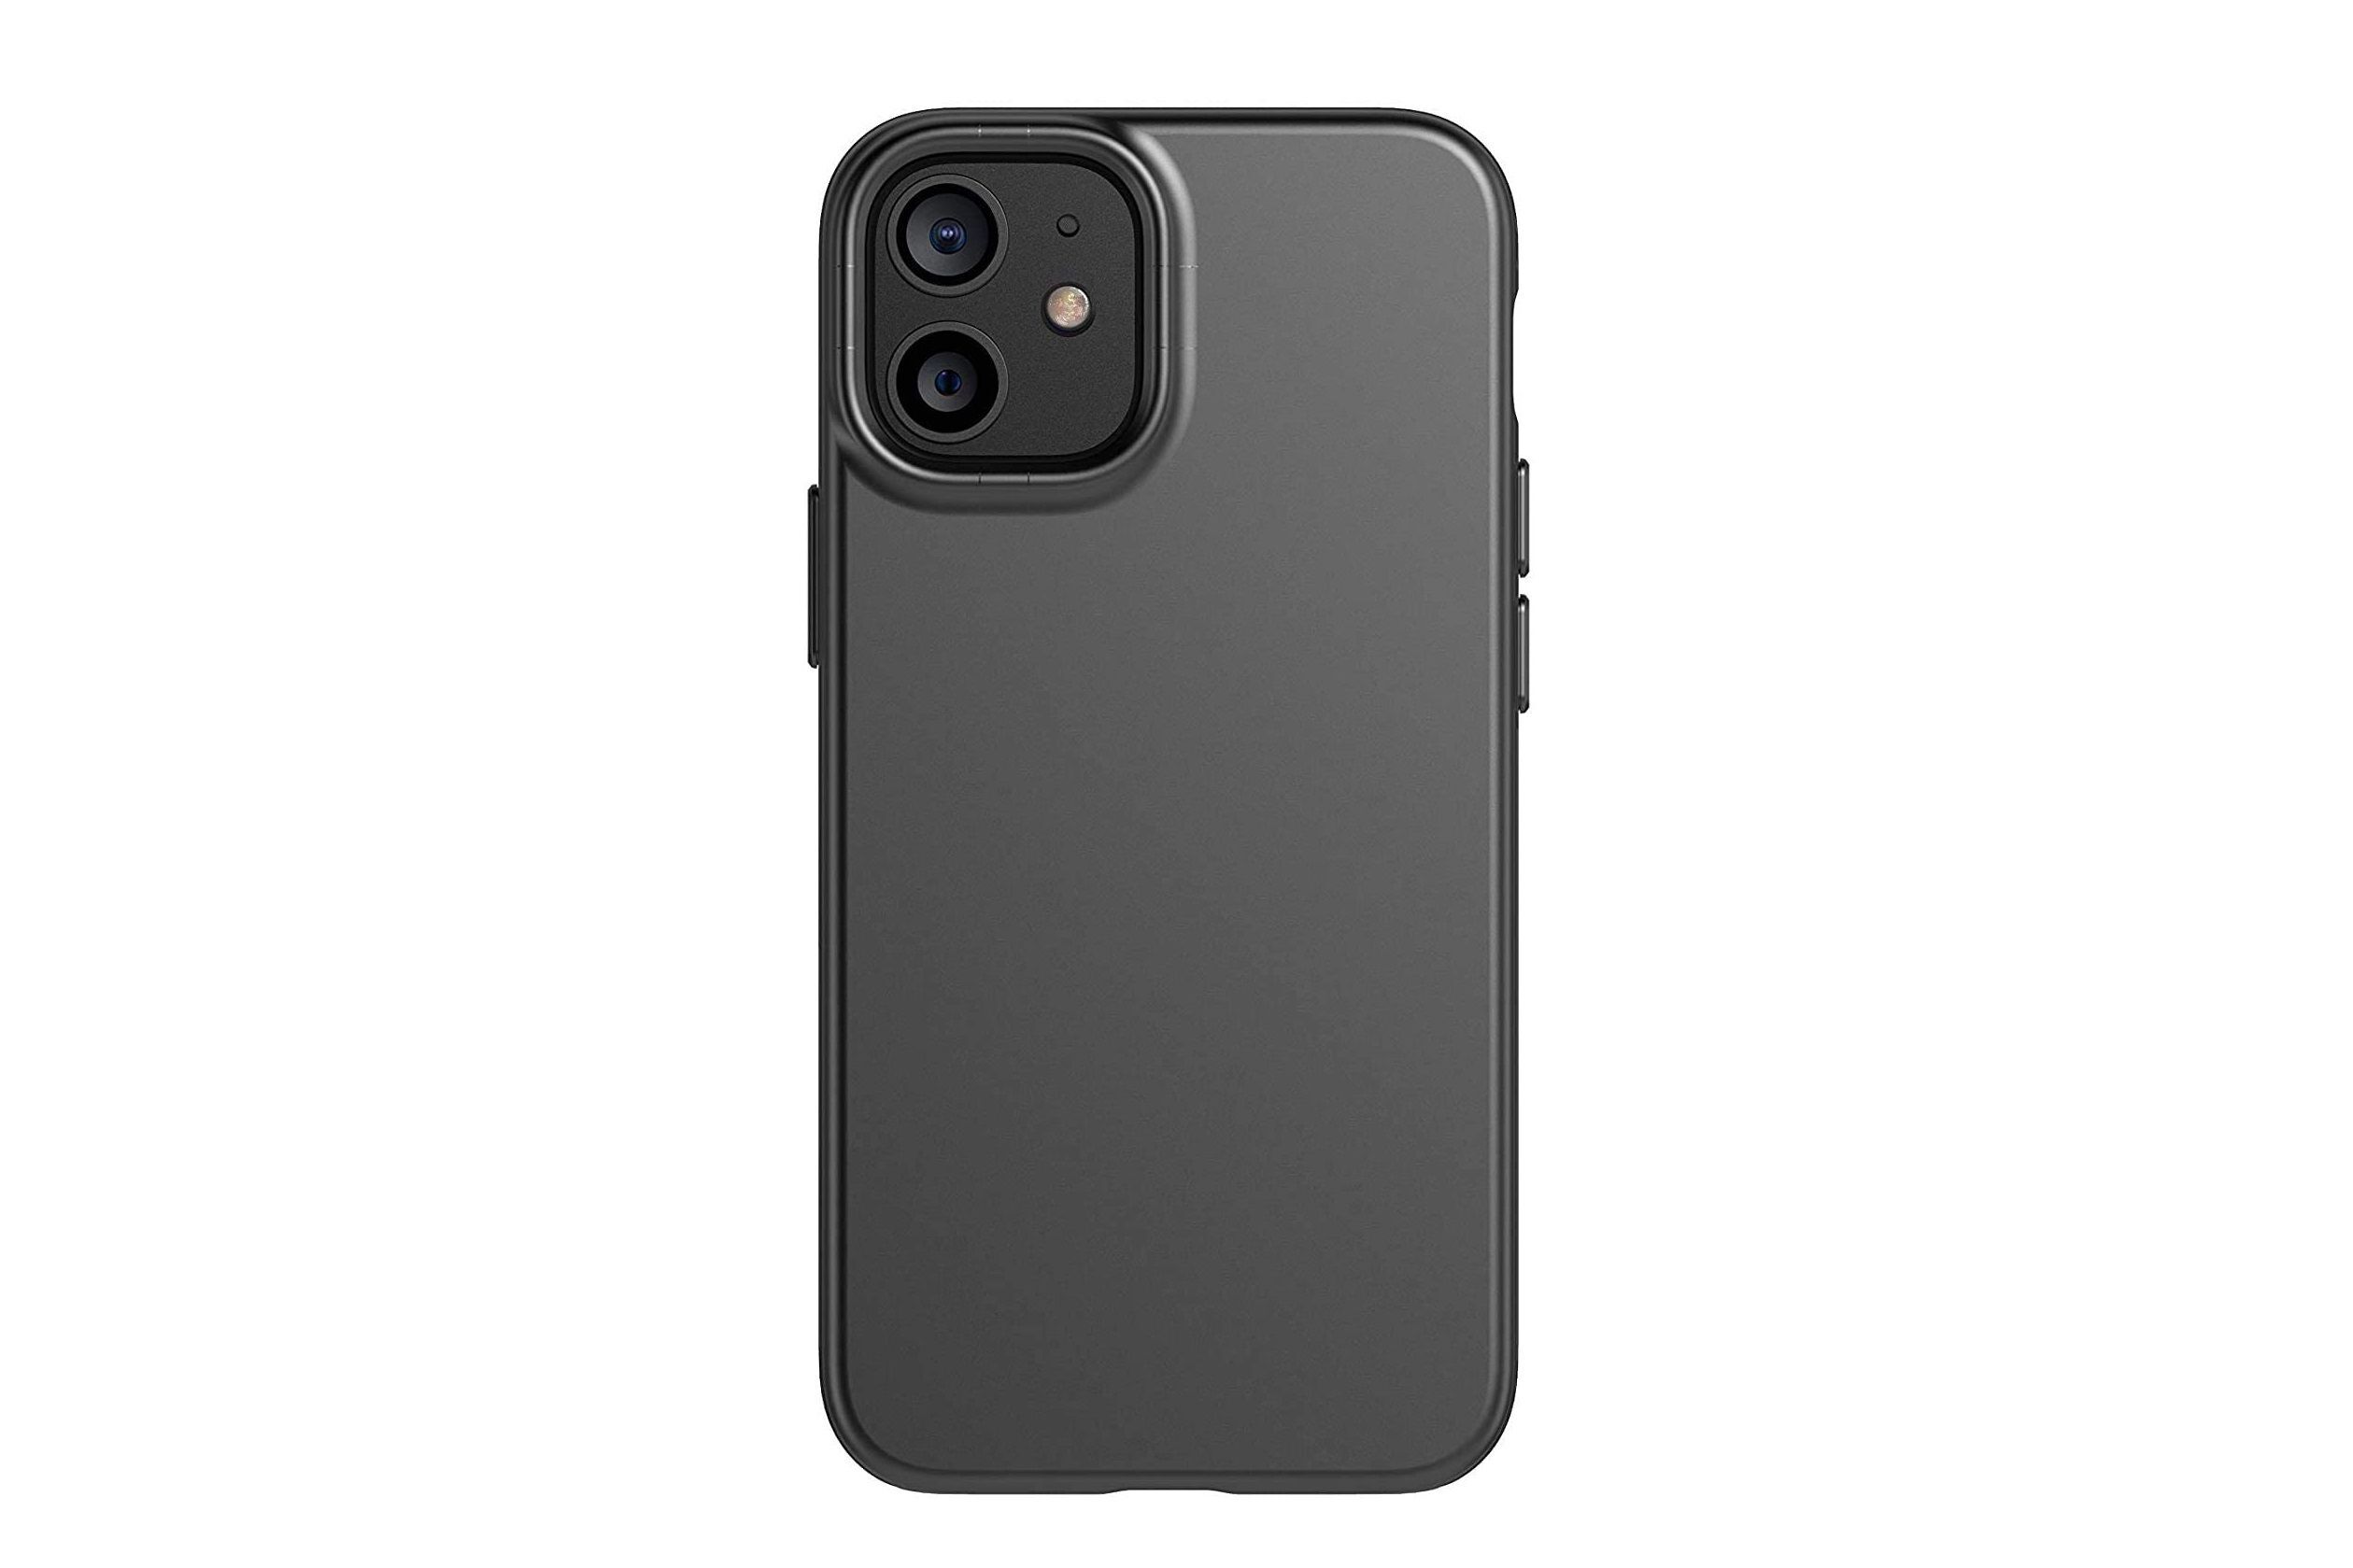 tech21 Evo Slim for Apple iPhone 12 Mini 5G - The best iPhone 12 mini cases you can get - updated July 2022